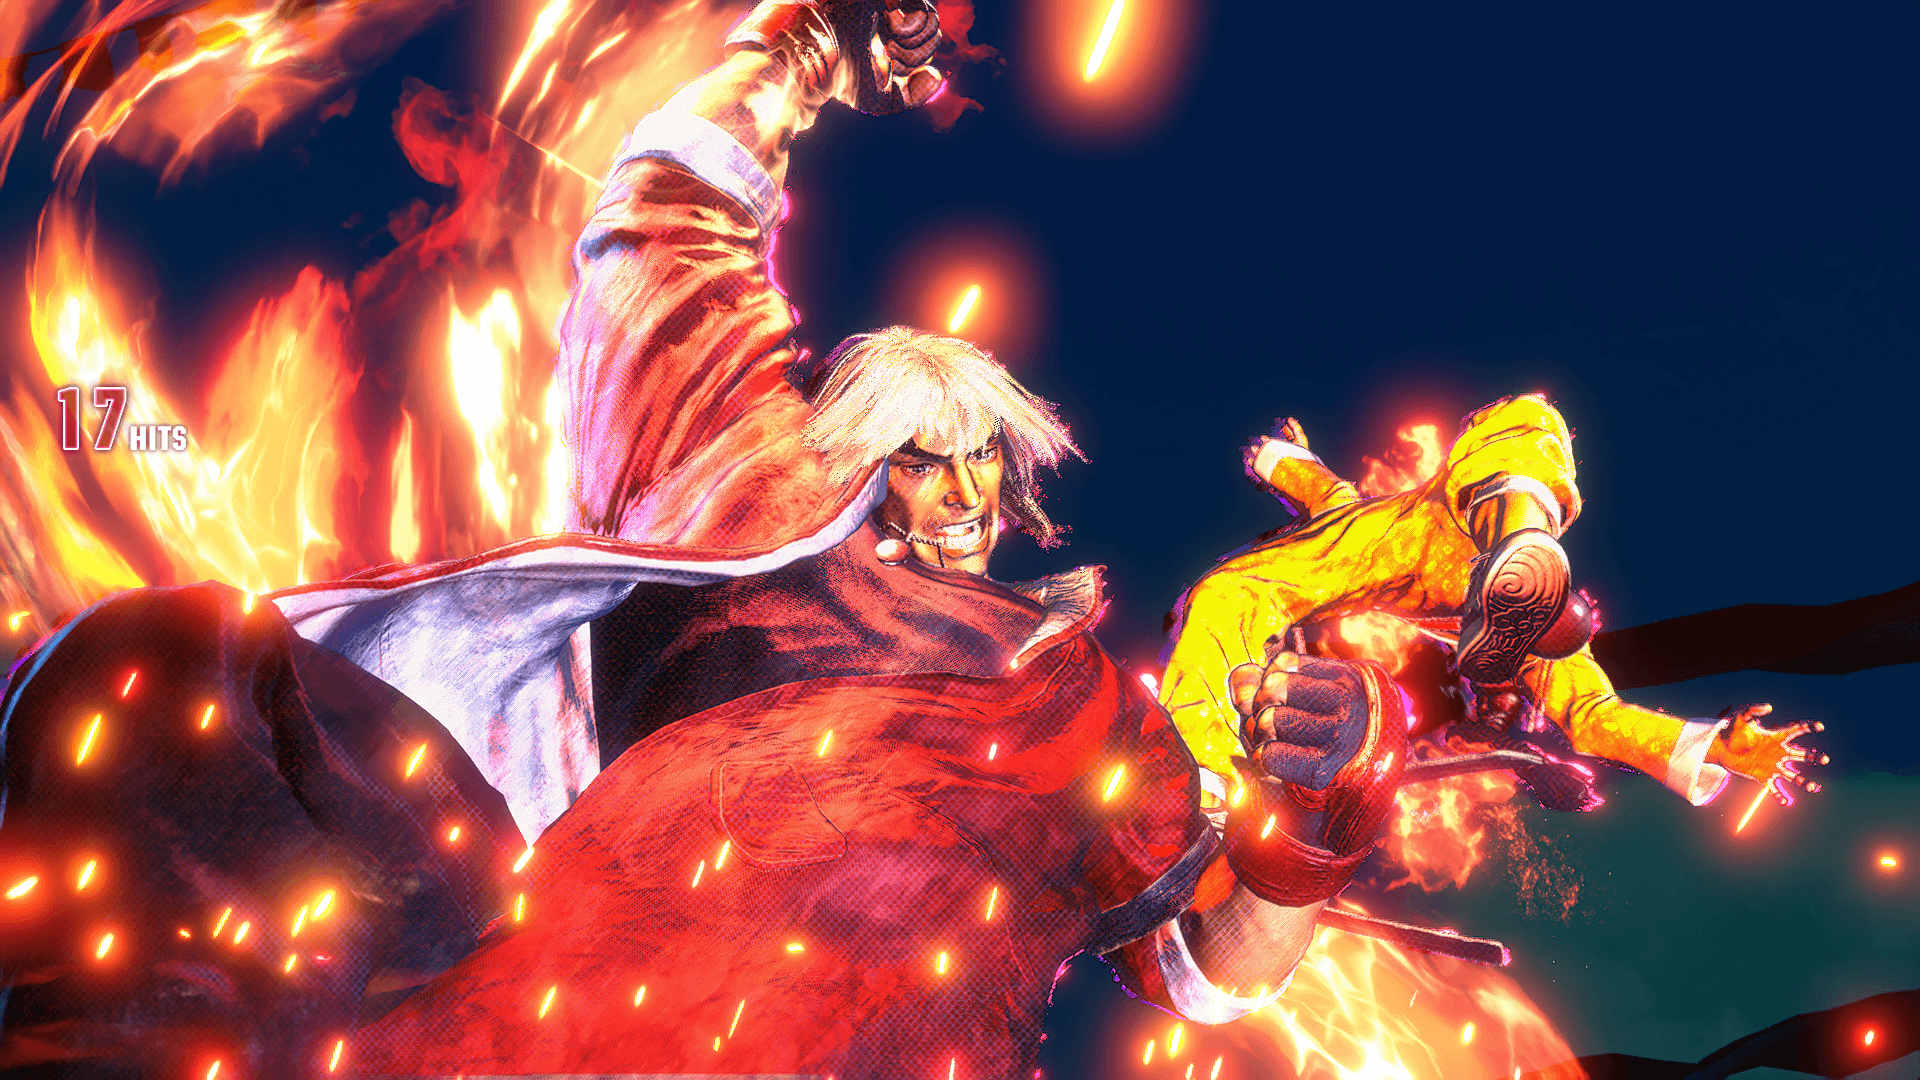 Ken Usurps Ryu as The Most Used Character in Street Fighter 6